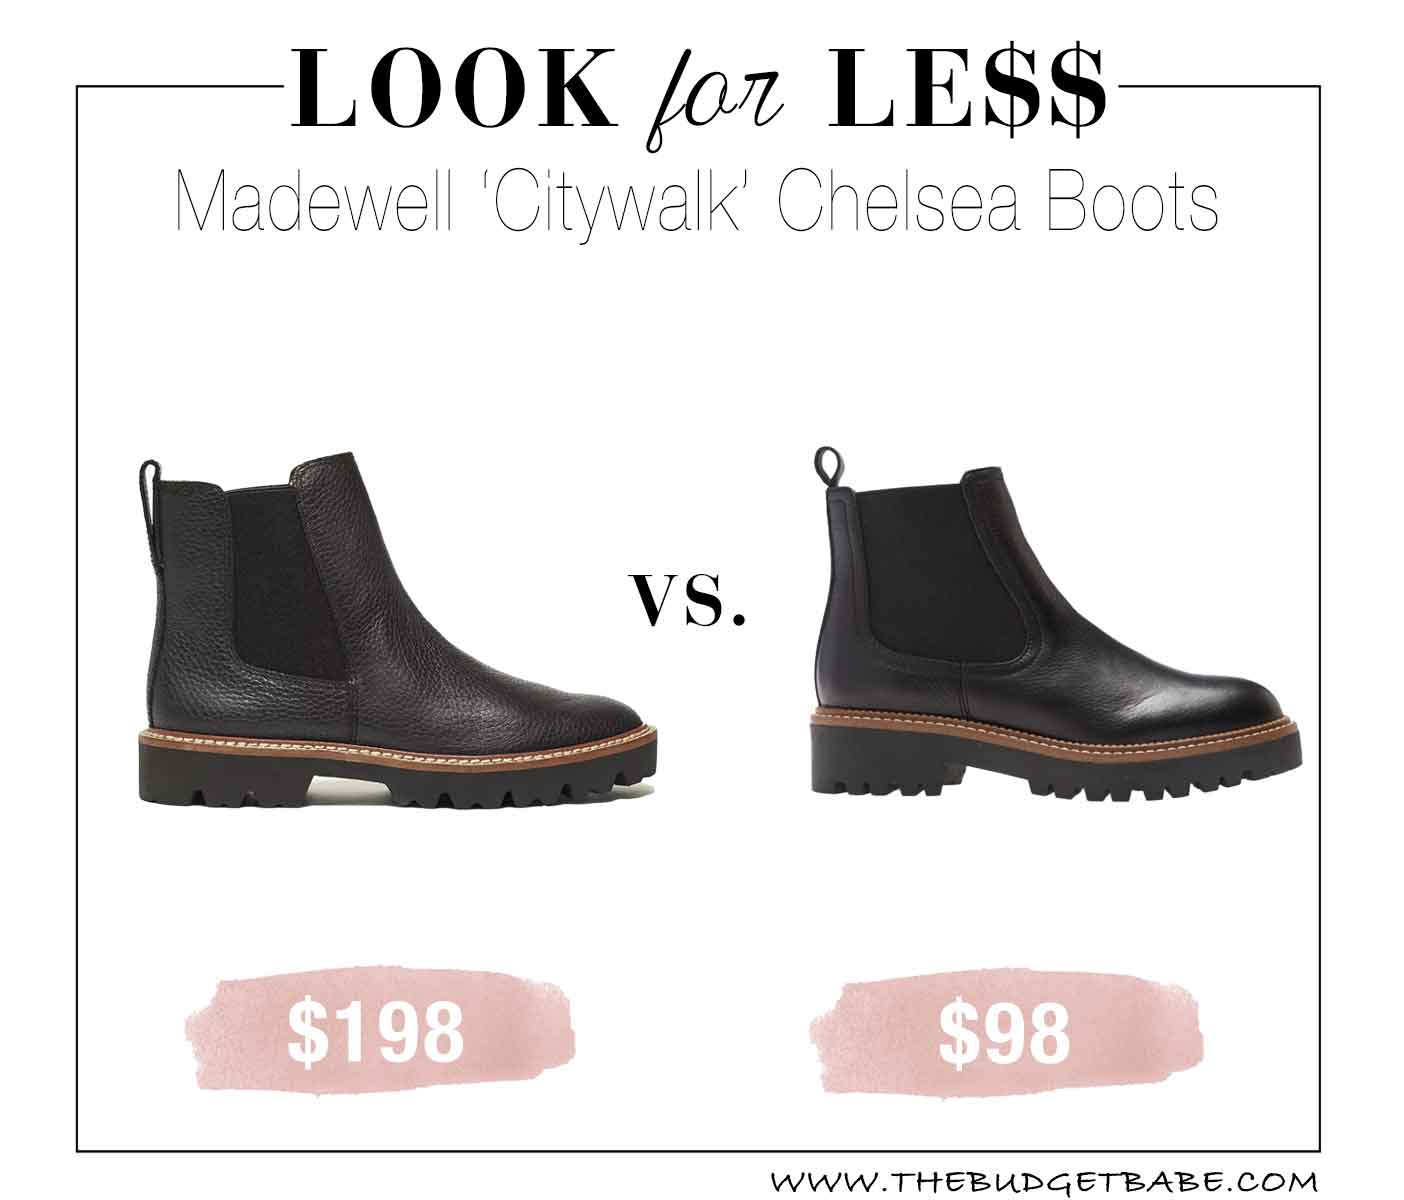 Madewell Chelsea boots look for less